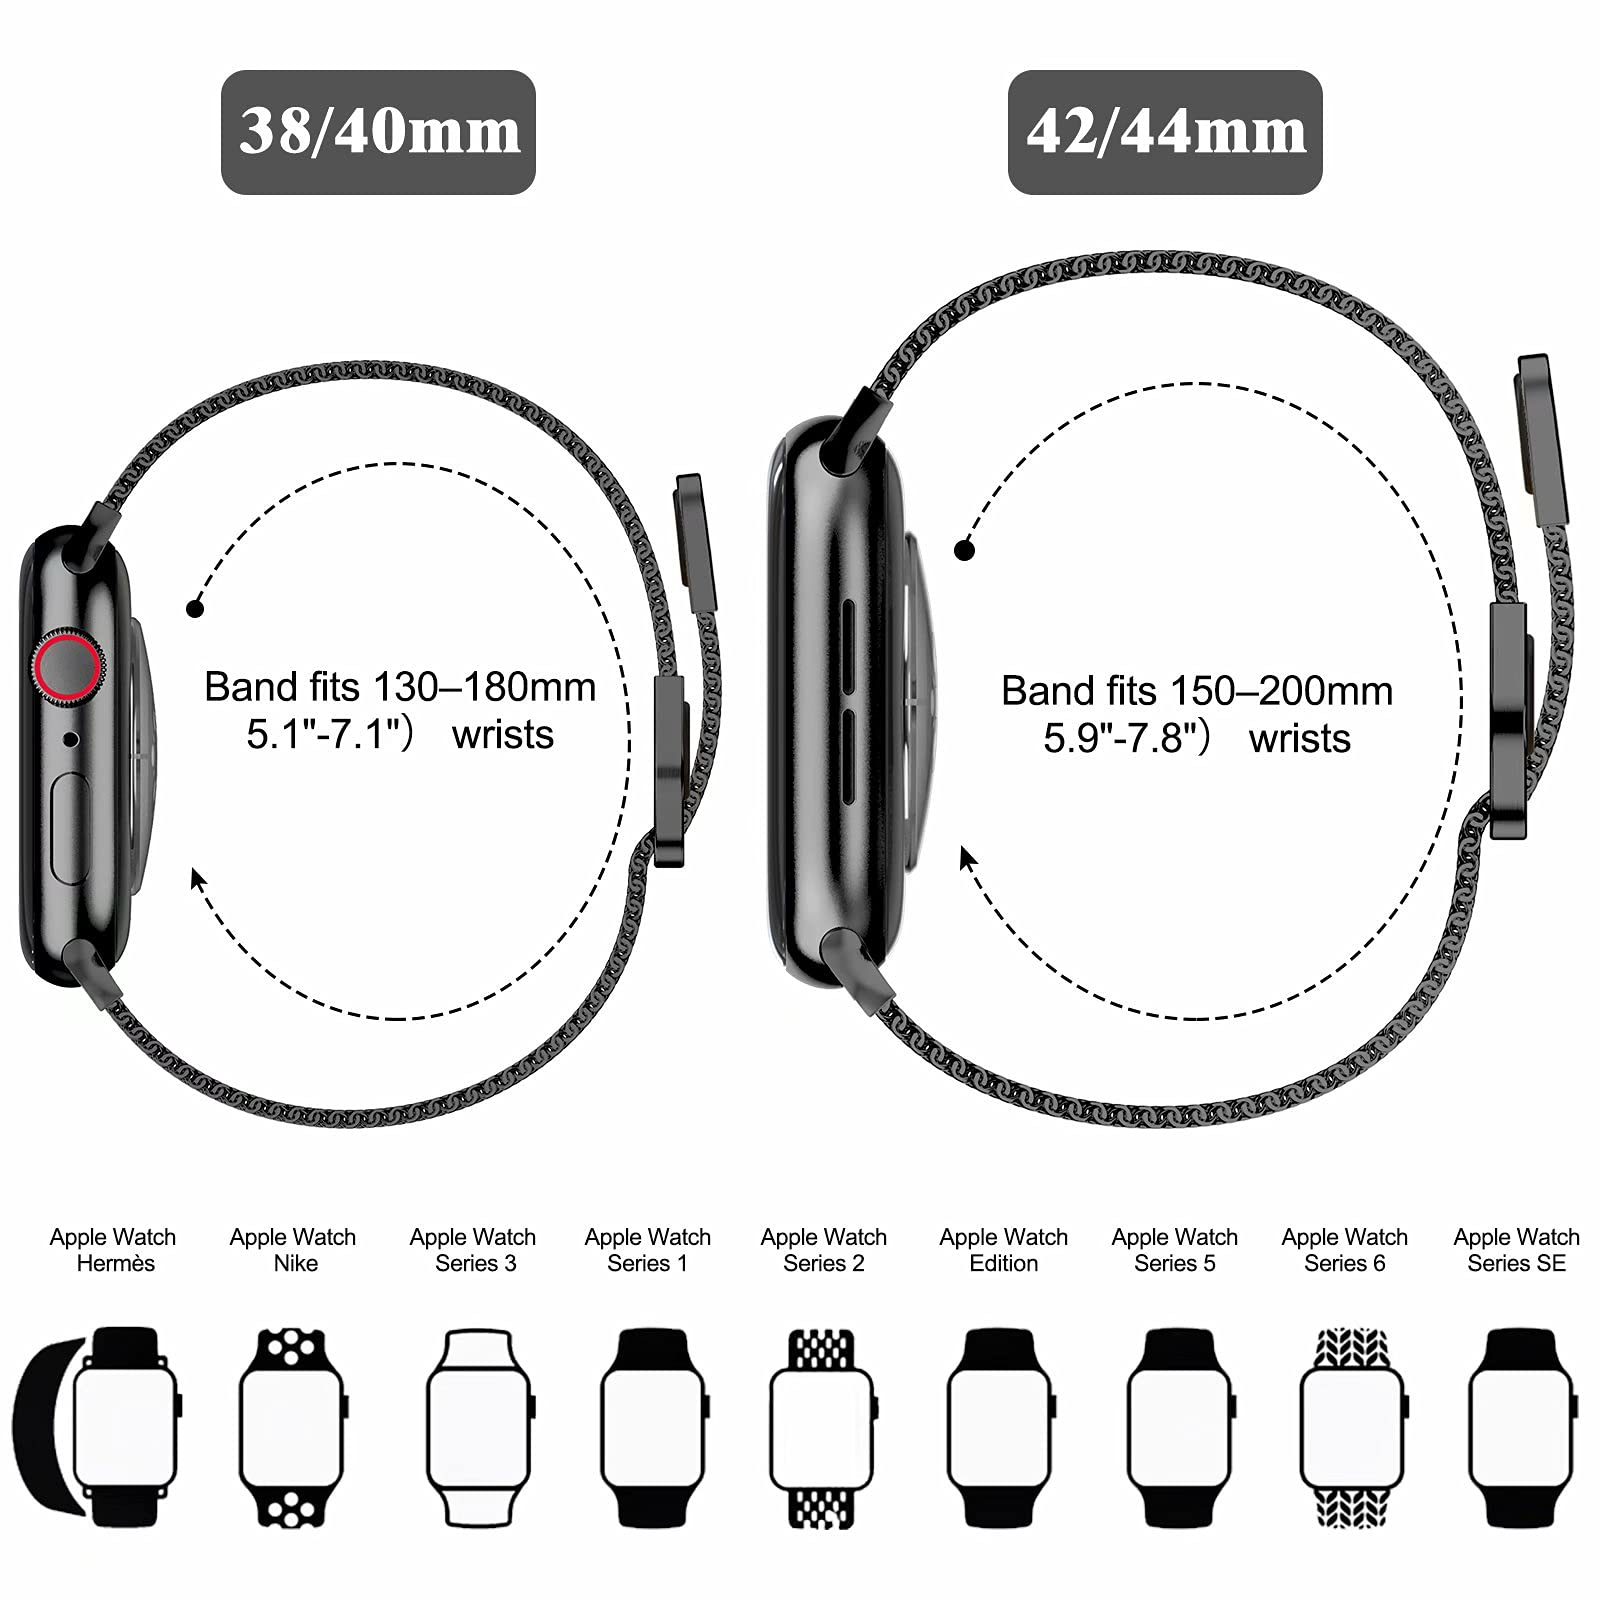 Geoumy Metal Magnetic Bands Compatible for Apple Watch Band 42mm with Case, Stainless Steel Milanese Mesh Loop Replacement Strap Compatible with iWatch Series SE 6/5/4/3/2/1 for Women Men,Black